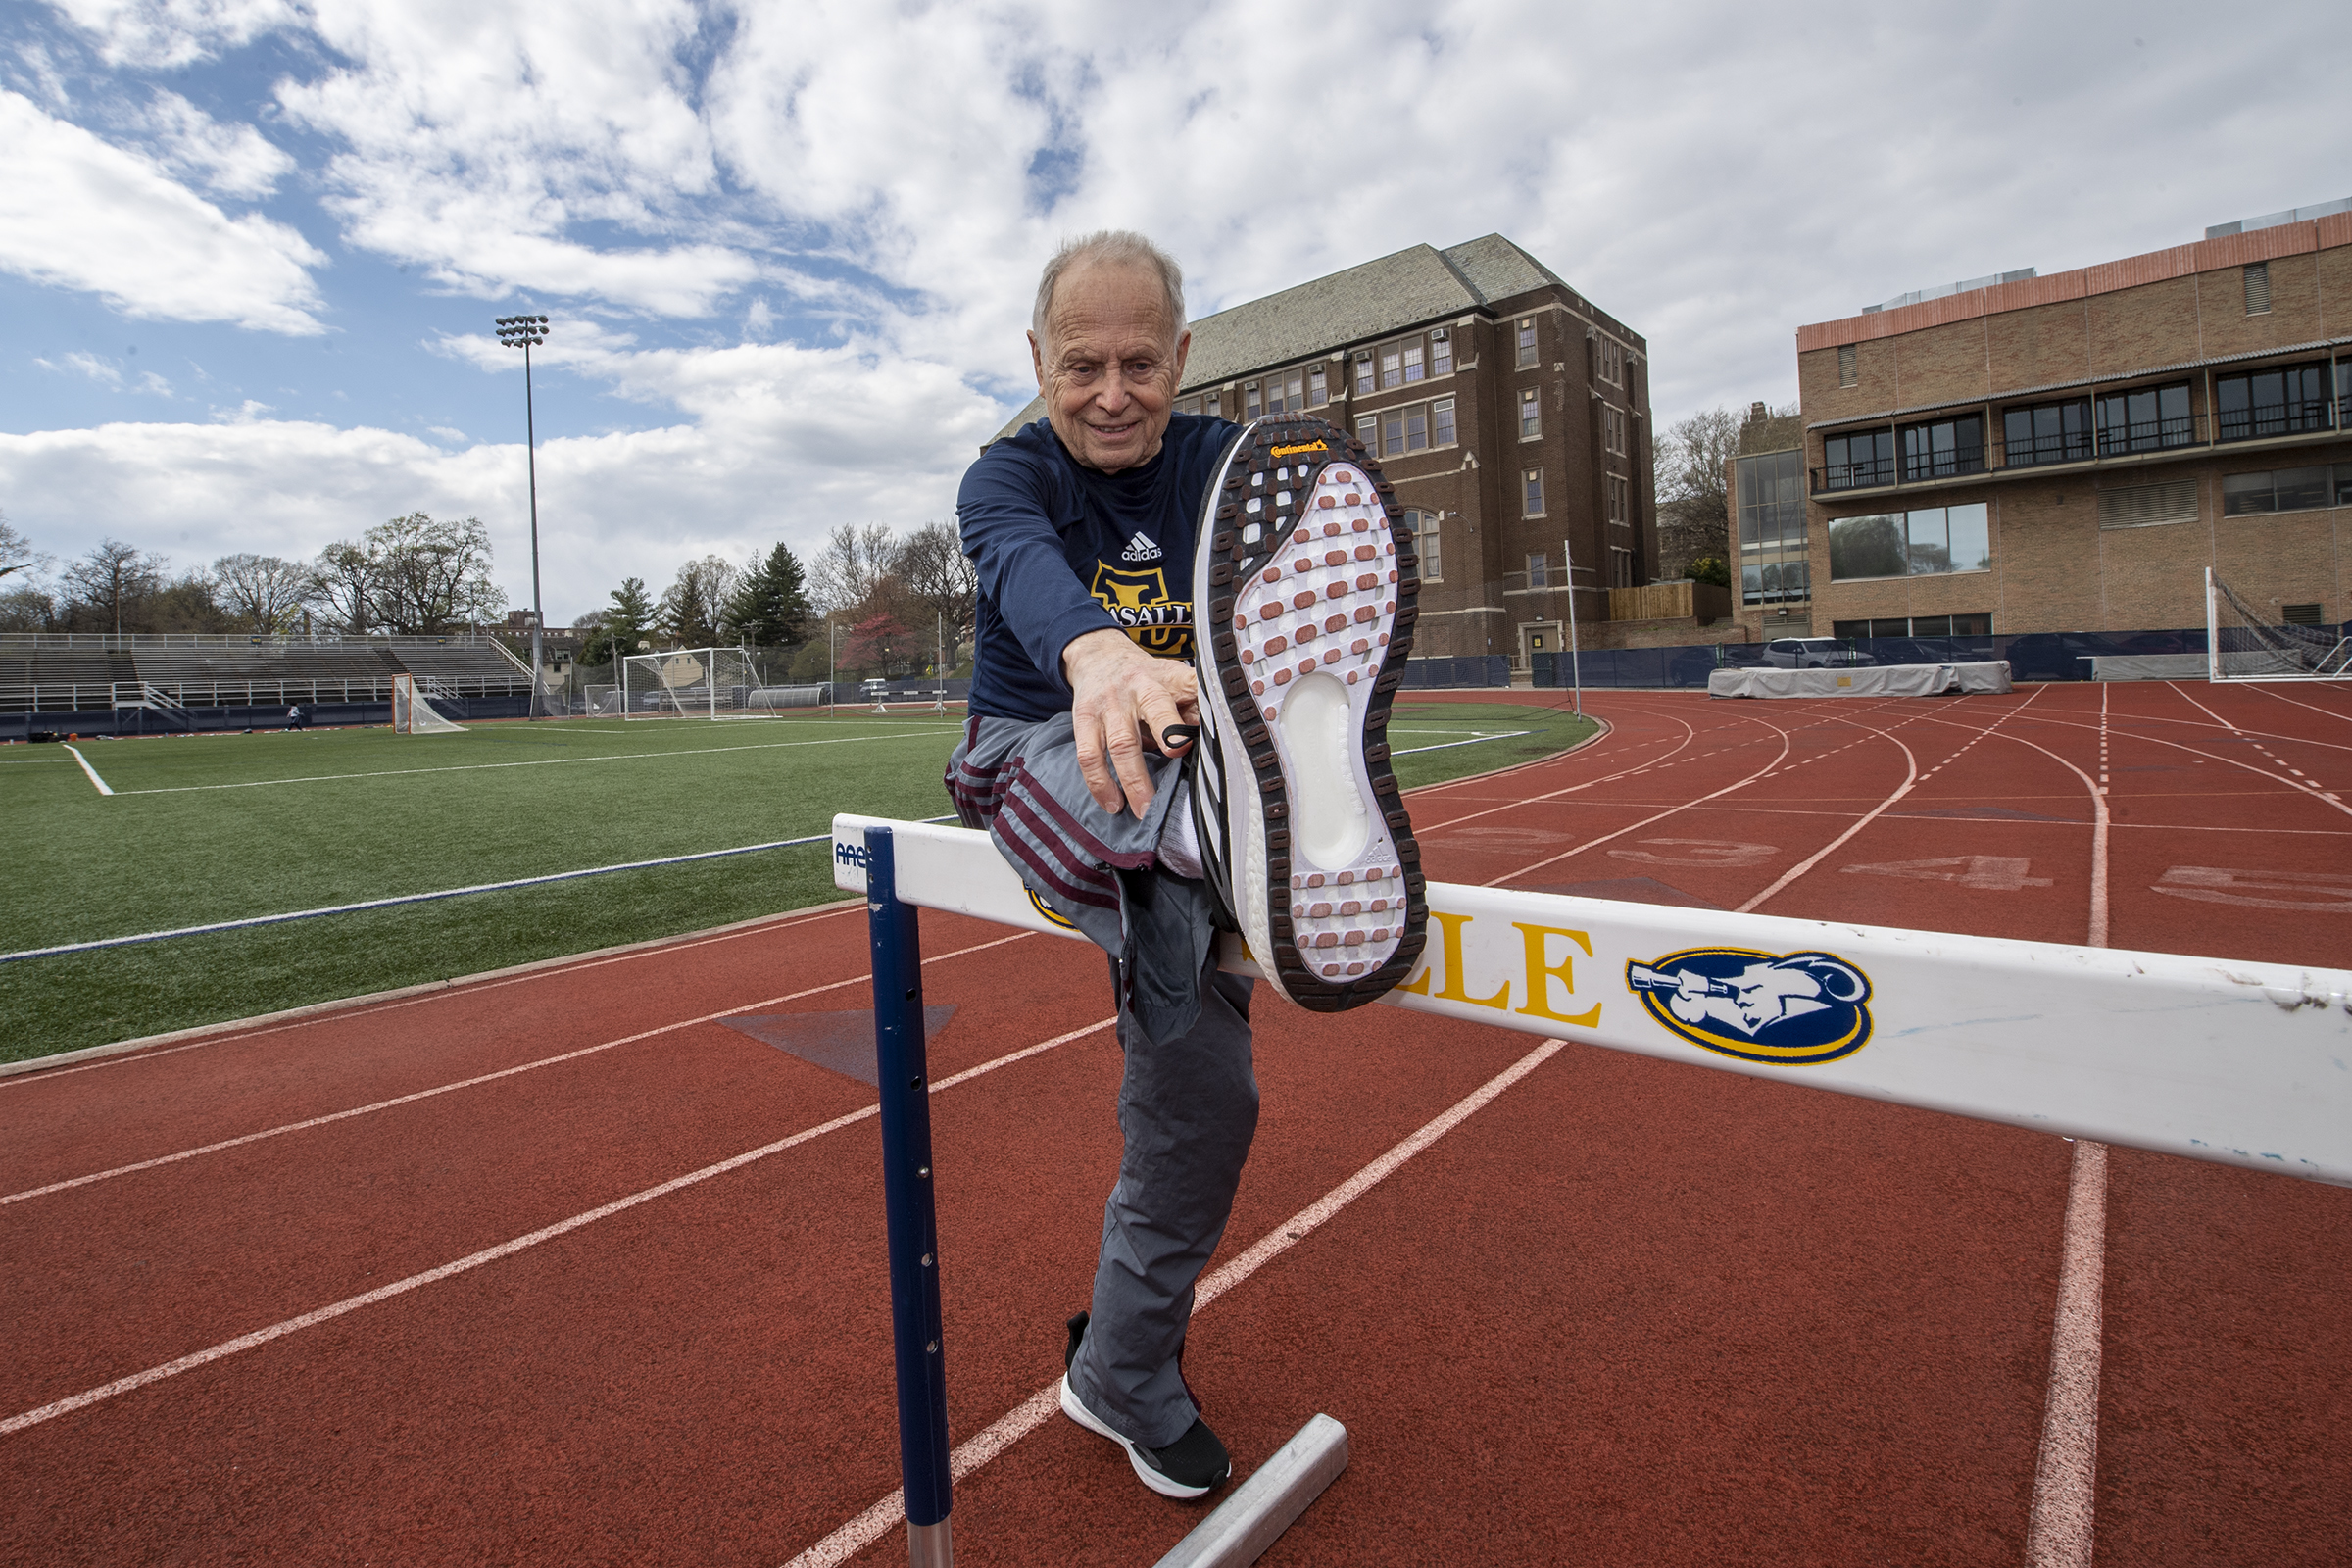 At 85, he's running his sixth Penn Relays and is in his 51st year of  teaching at La Salle University